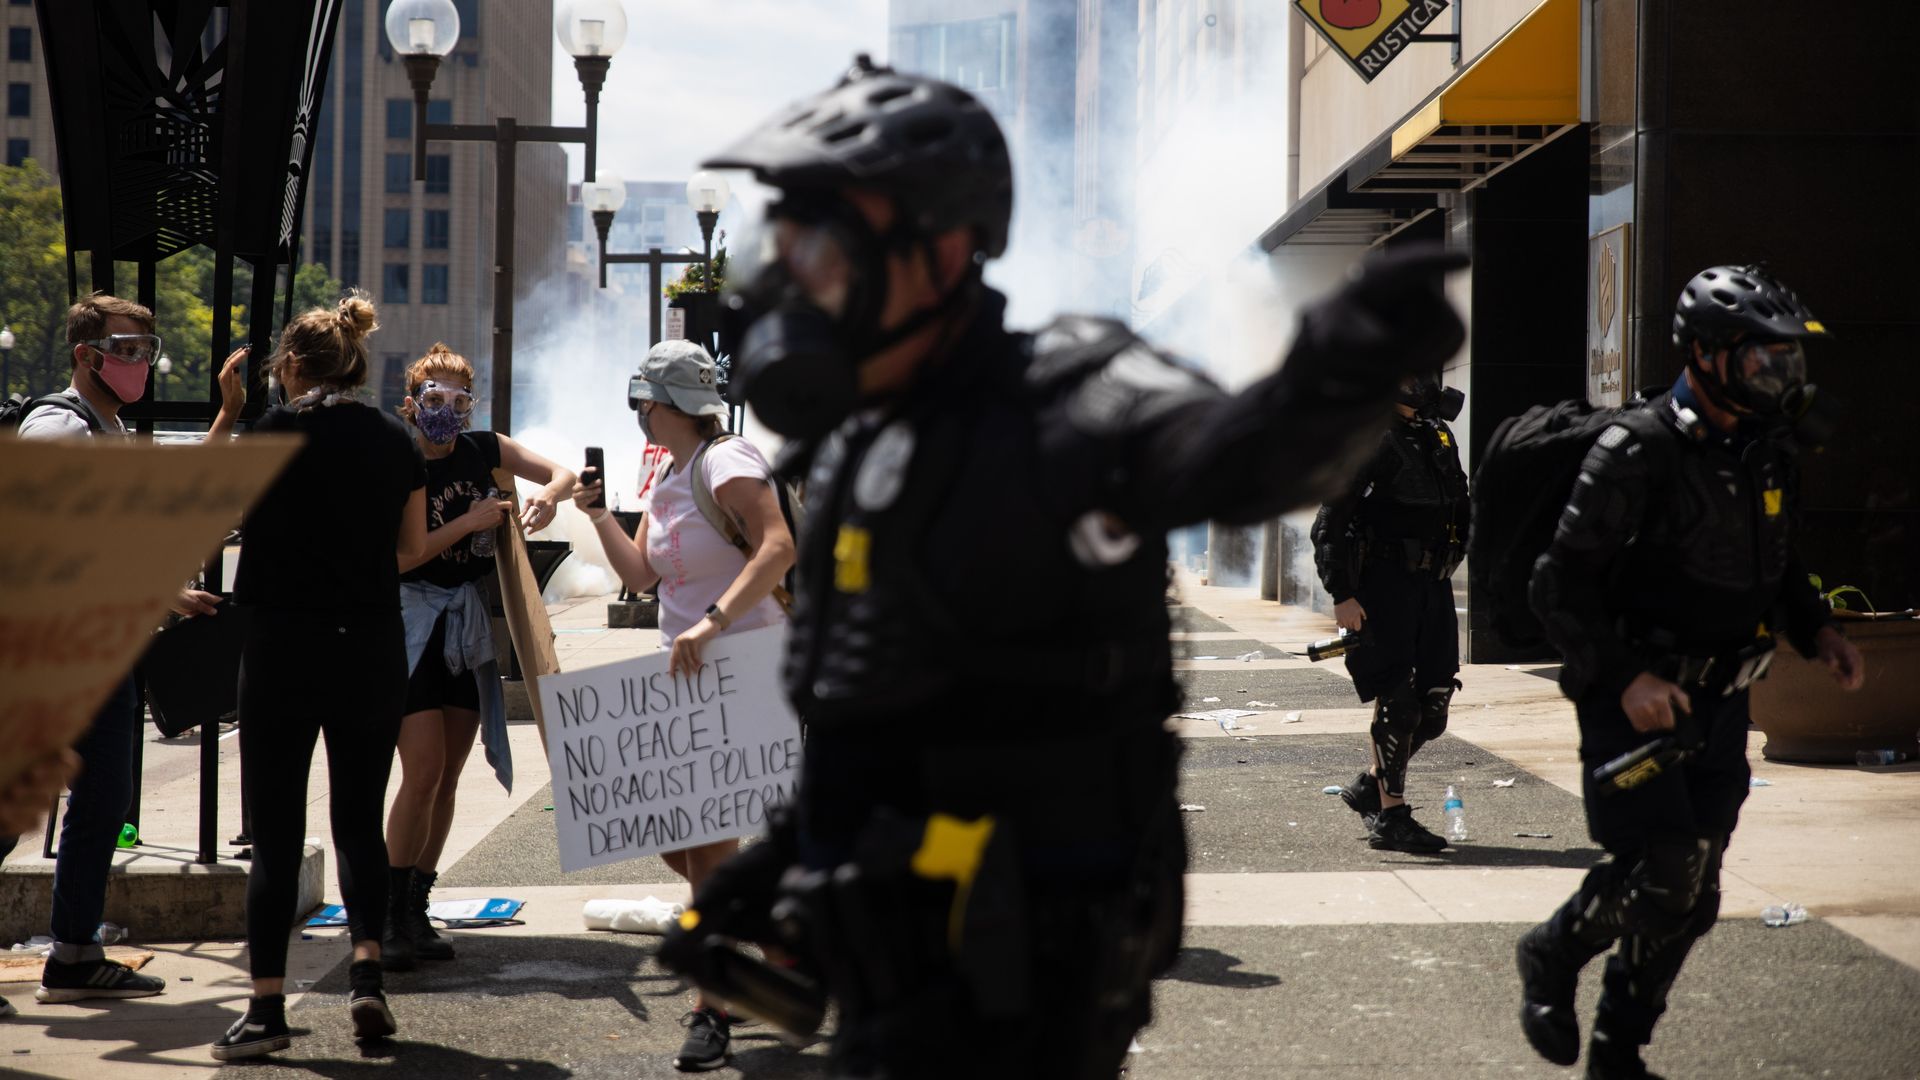 Police officers and protesters are seen amid a cloud of tear gas during a 2020 protest in Columbus.